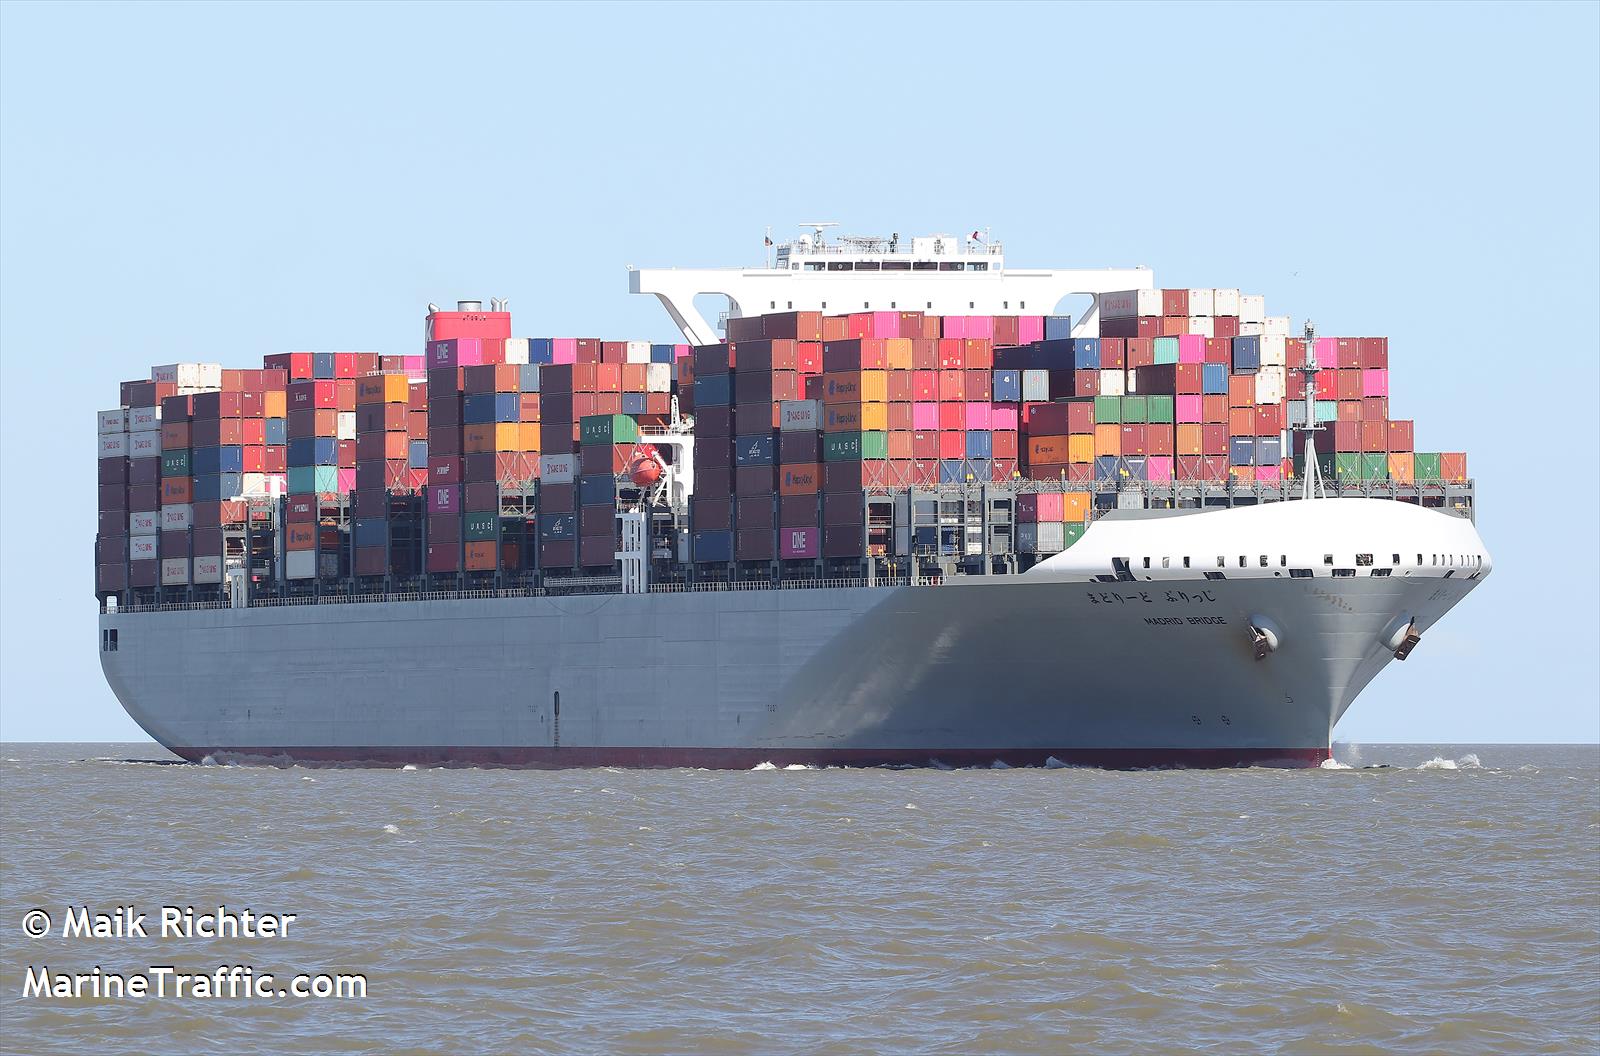 Madrid Bridge to Discharge Damaged Containers in Charleston, ONE Says